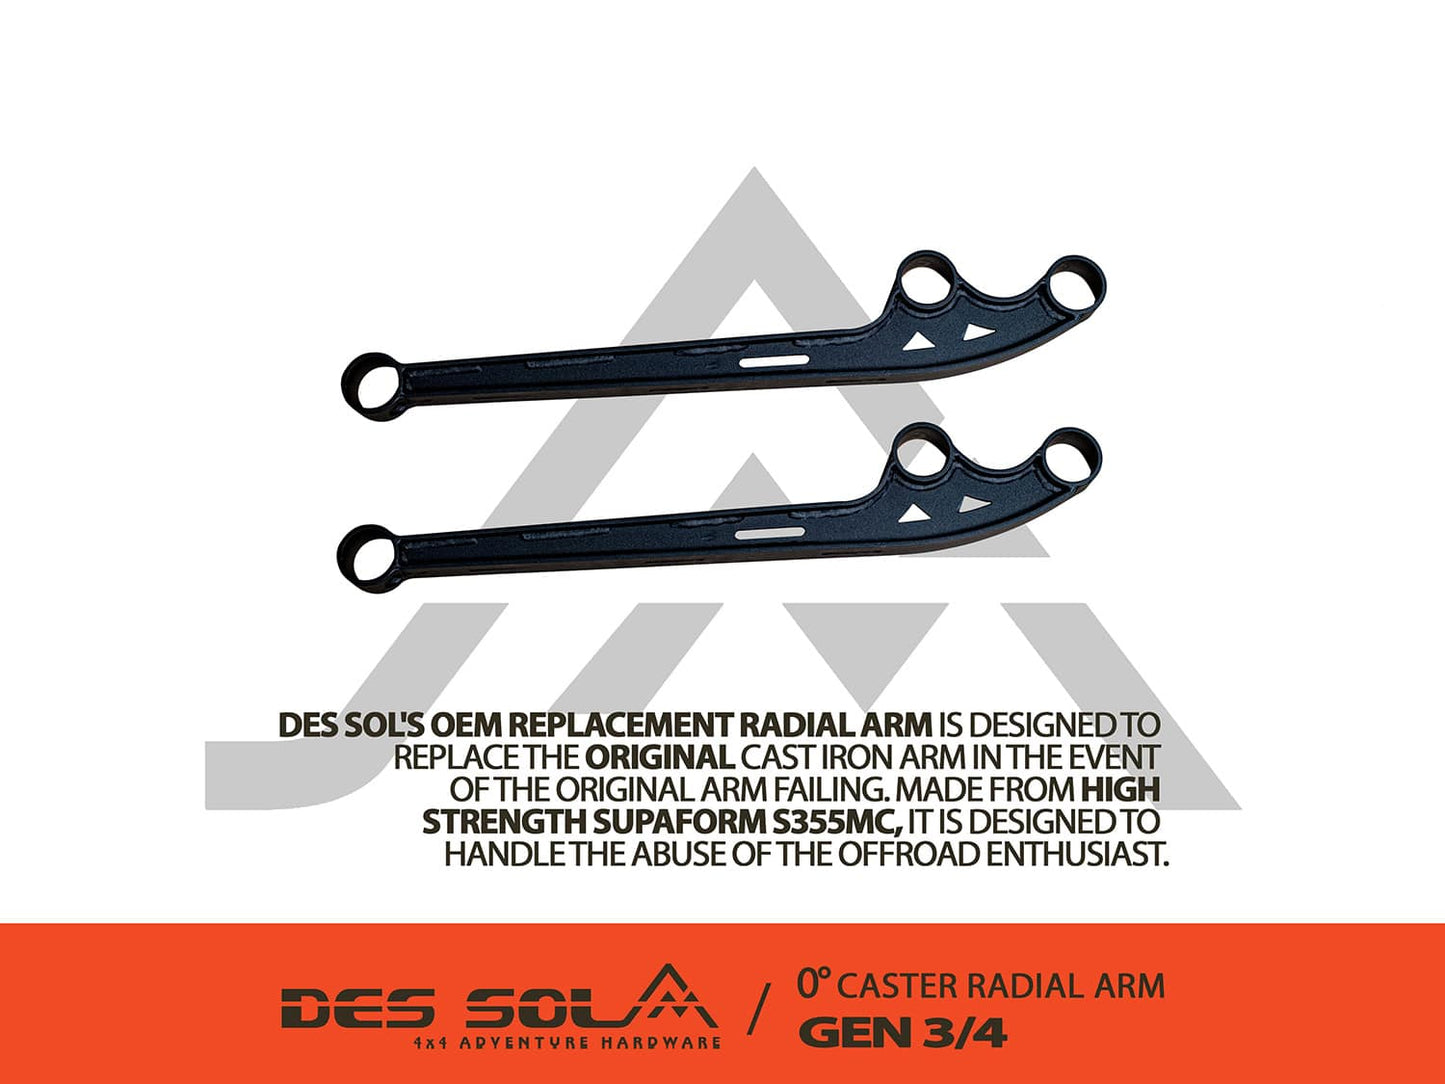 OEM Replacement Radial Arms